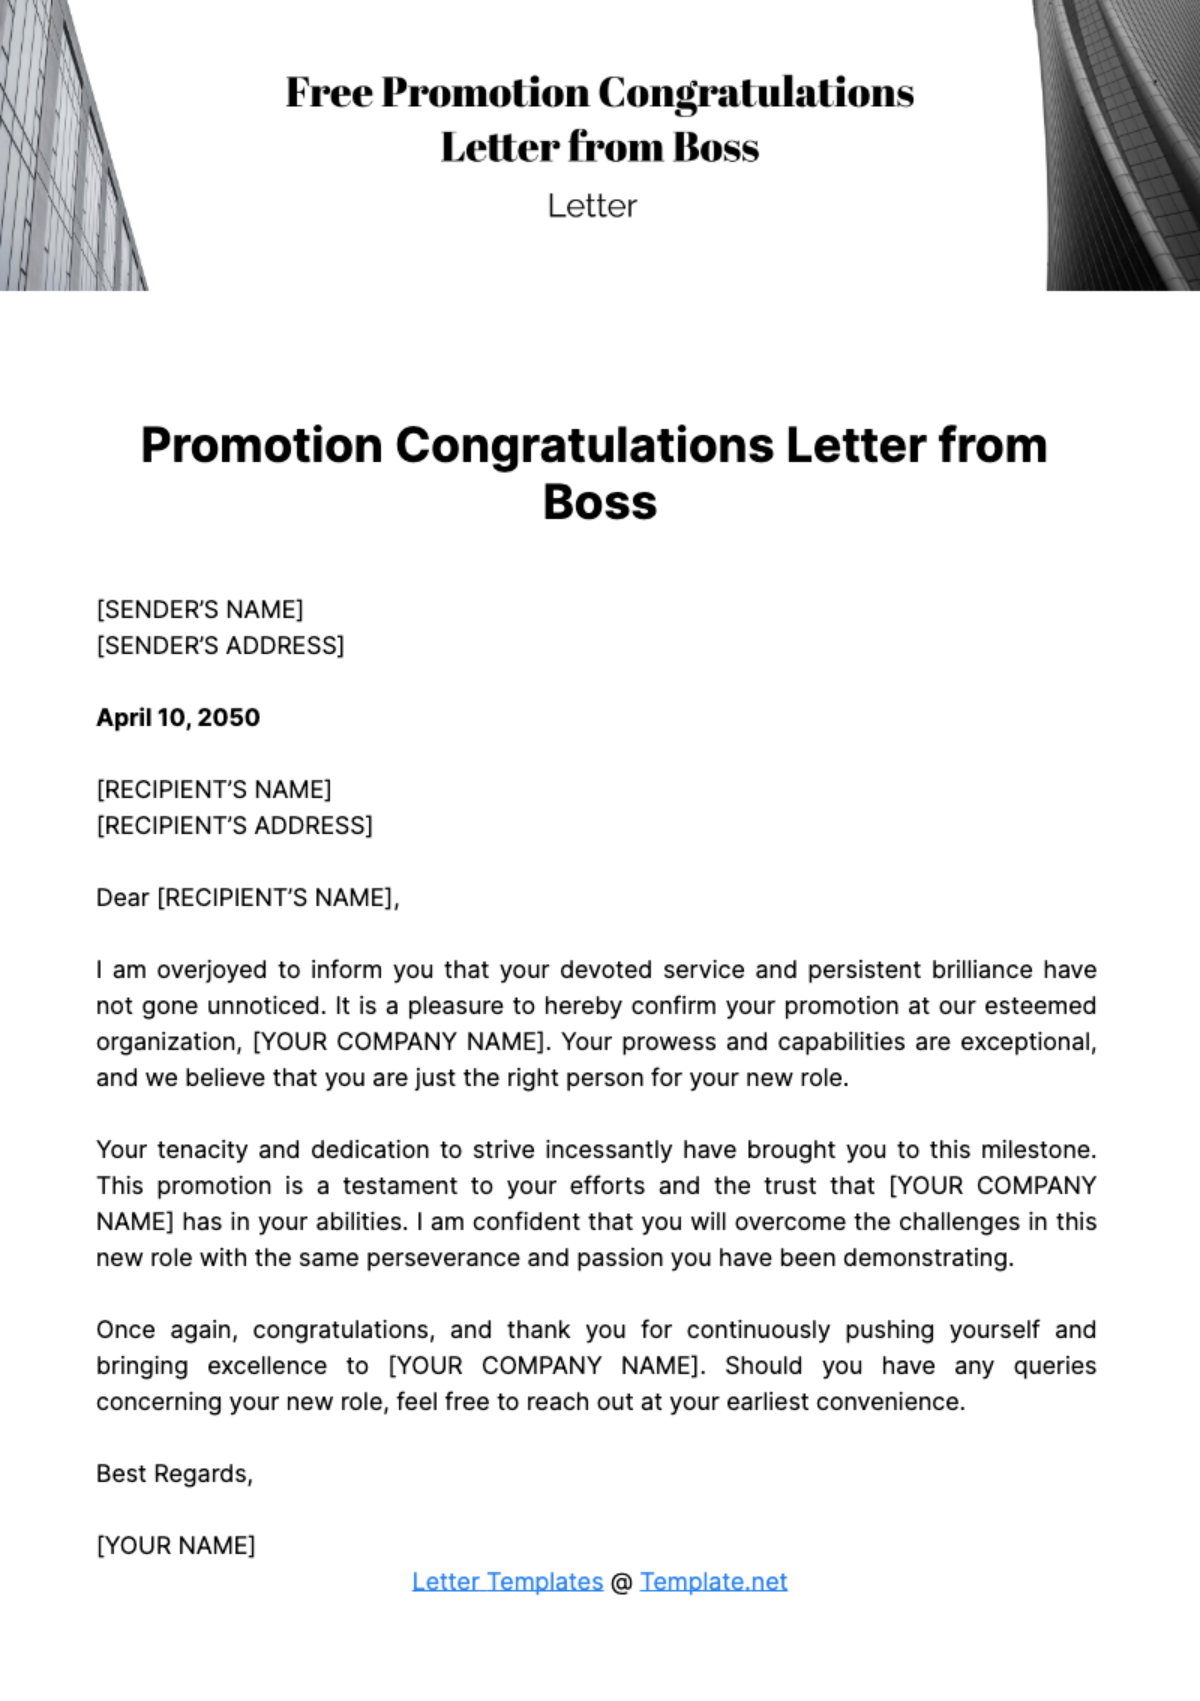 Free Promotion Congratulations Letter from Boss Template